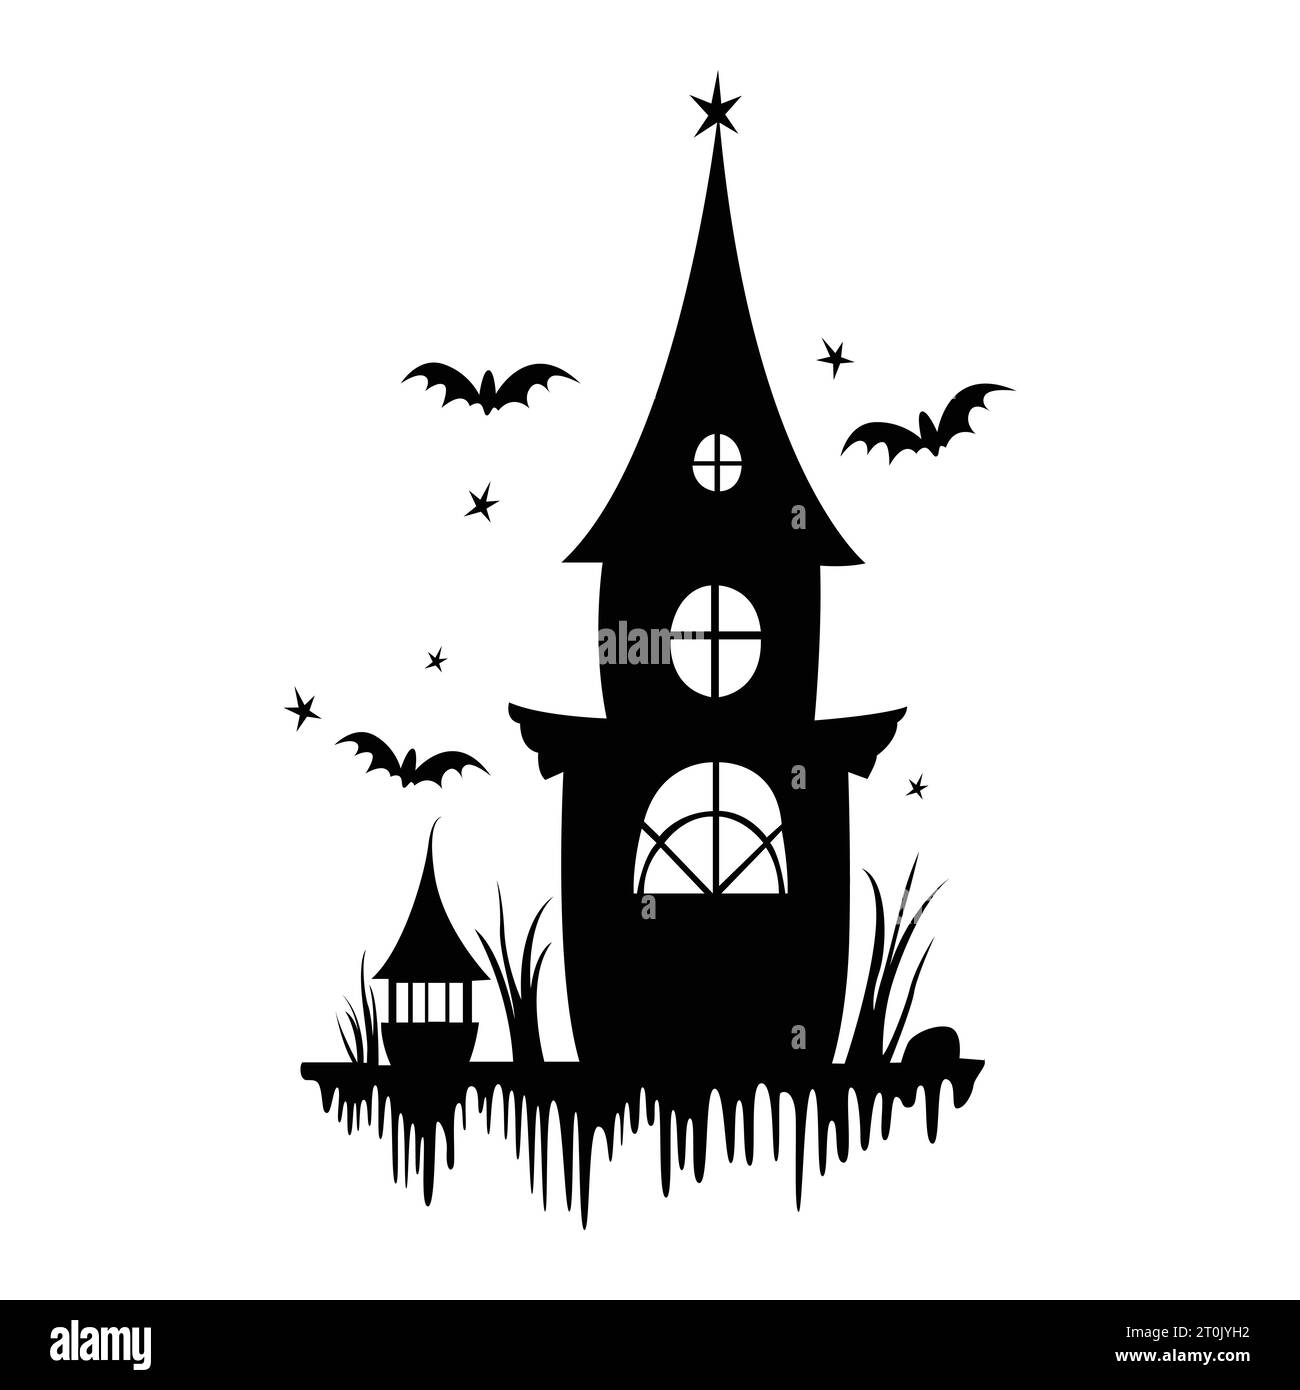 Enter the realm of fright with Halloween haunted house icon – a spine-tingling addition to your spooky designs Stock Vector